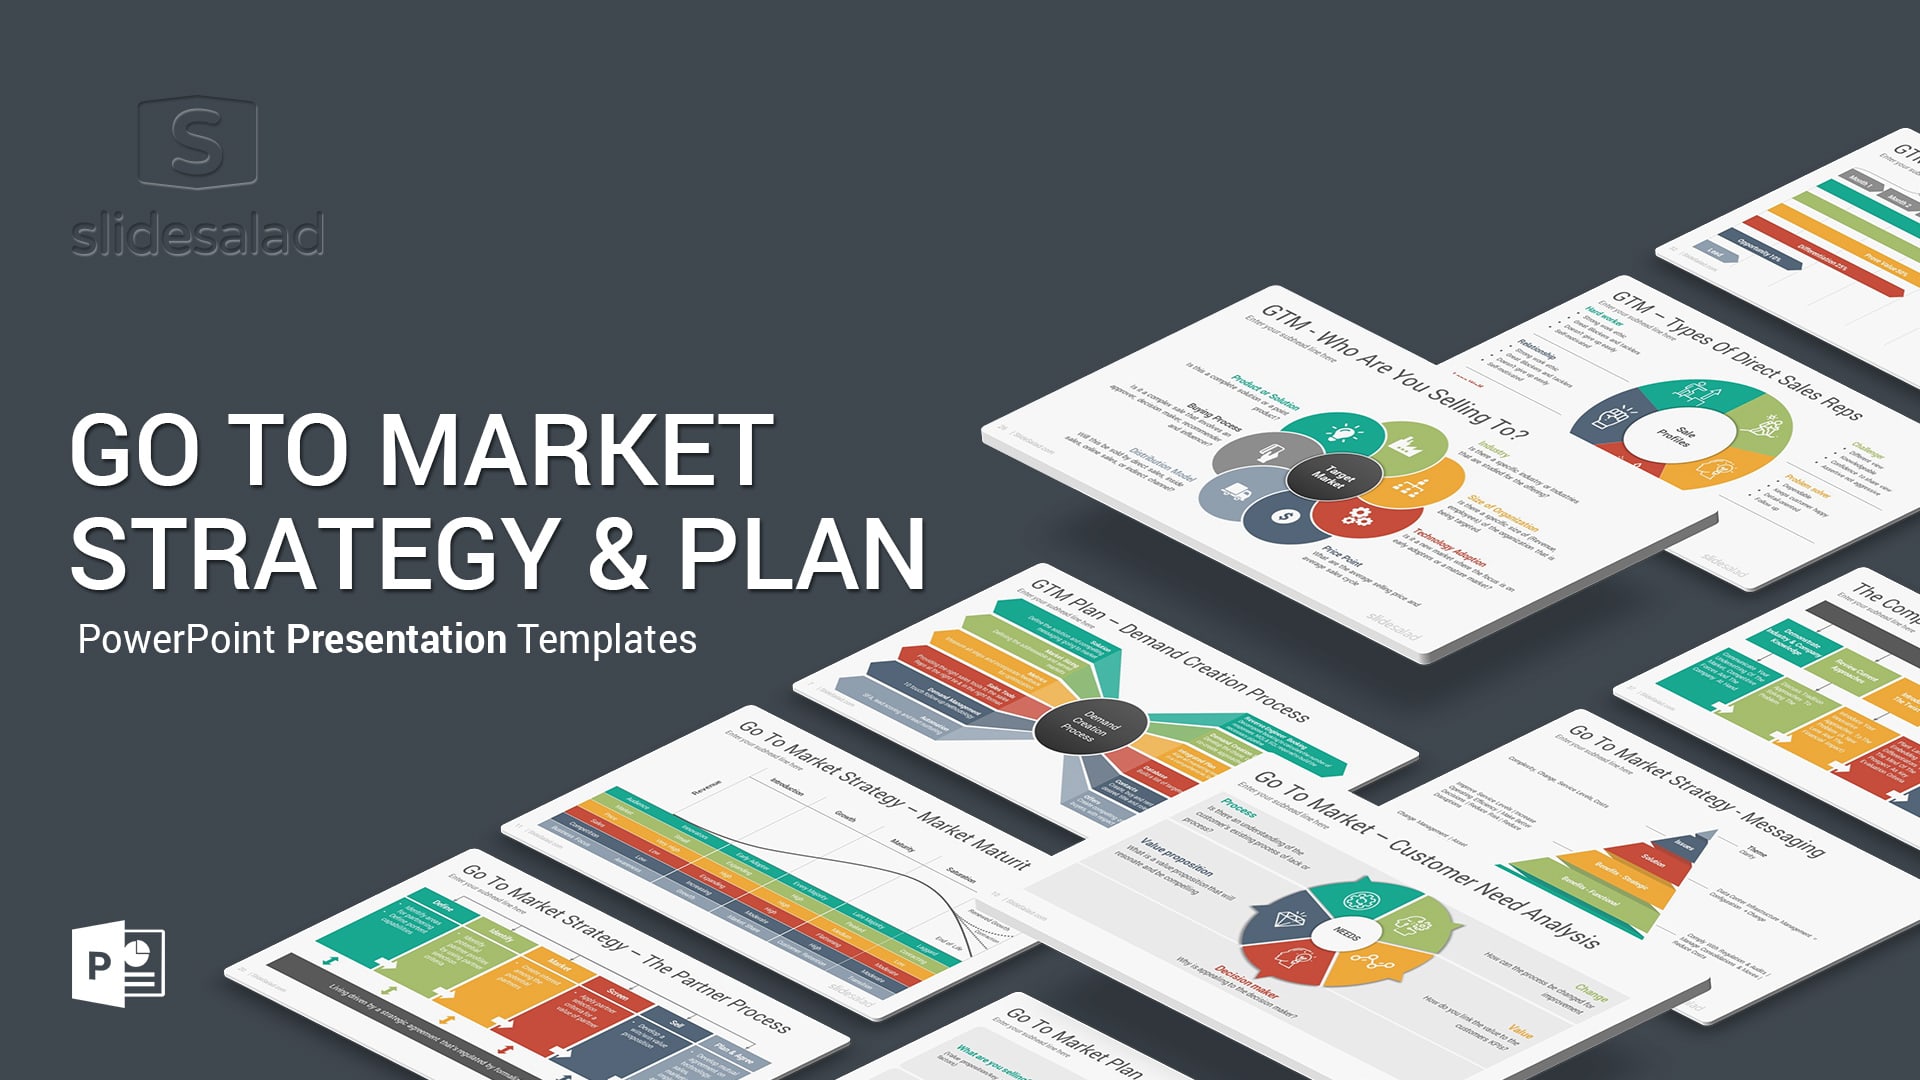 Go To Market Strategy and Plan PowerPoint Templates Diagrams - Trendy PowerPoint Template Designs